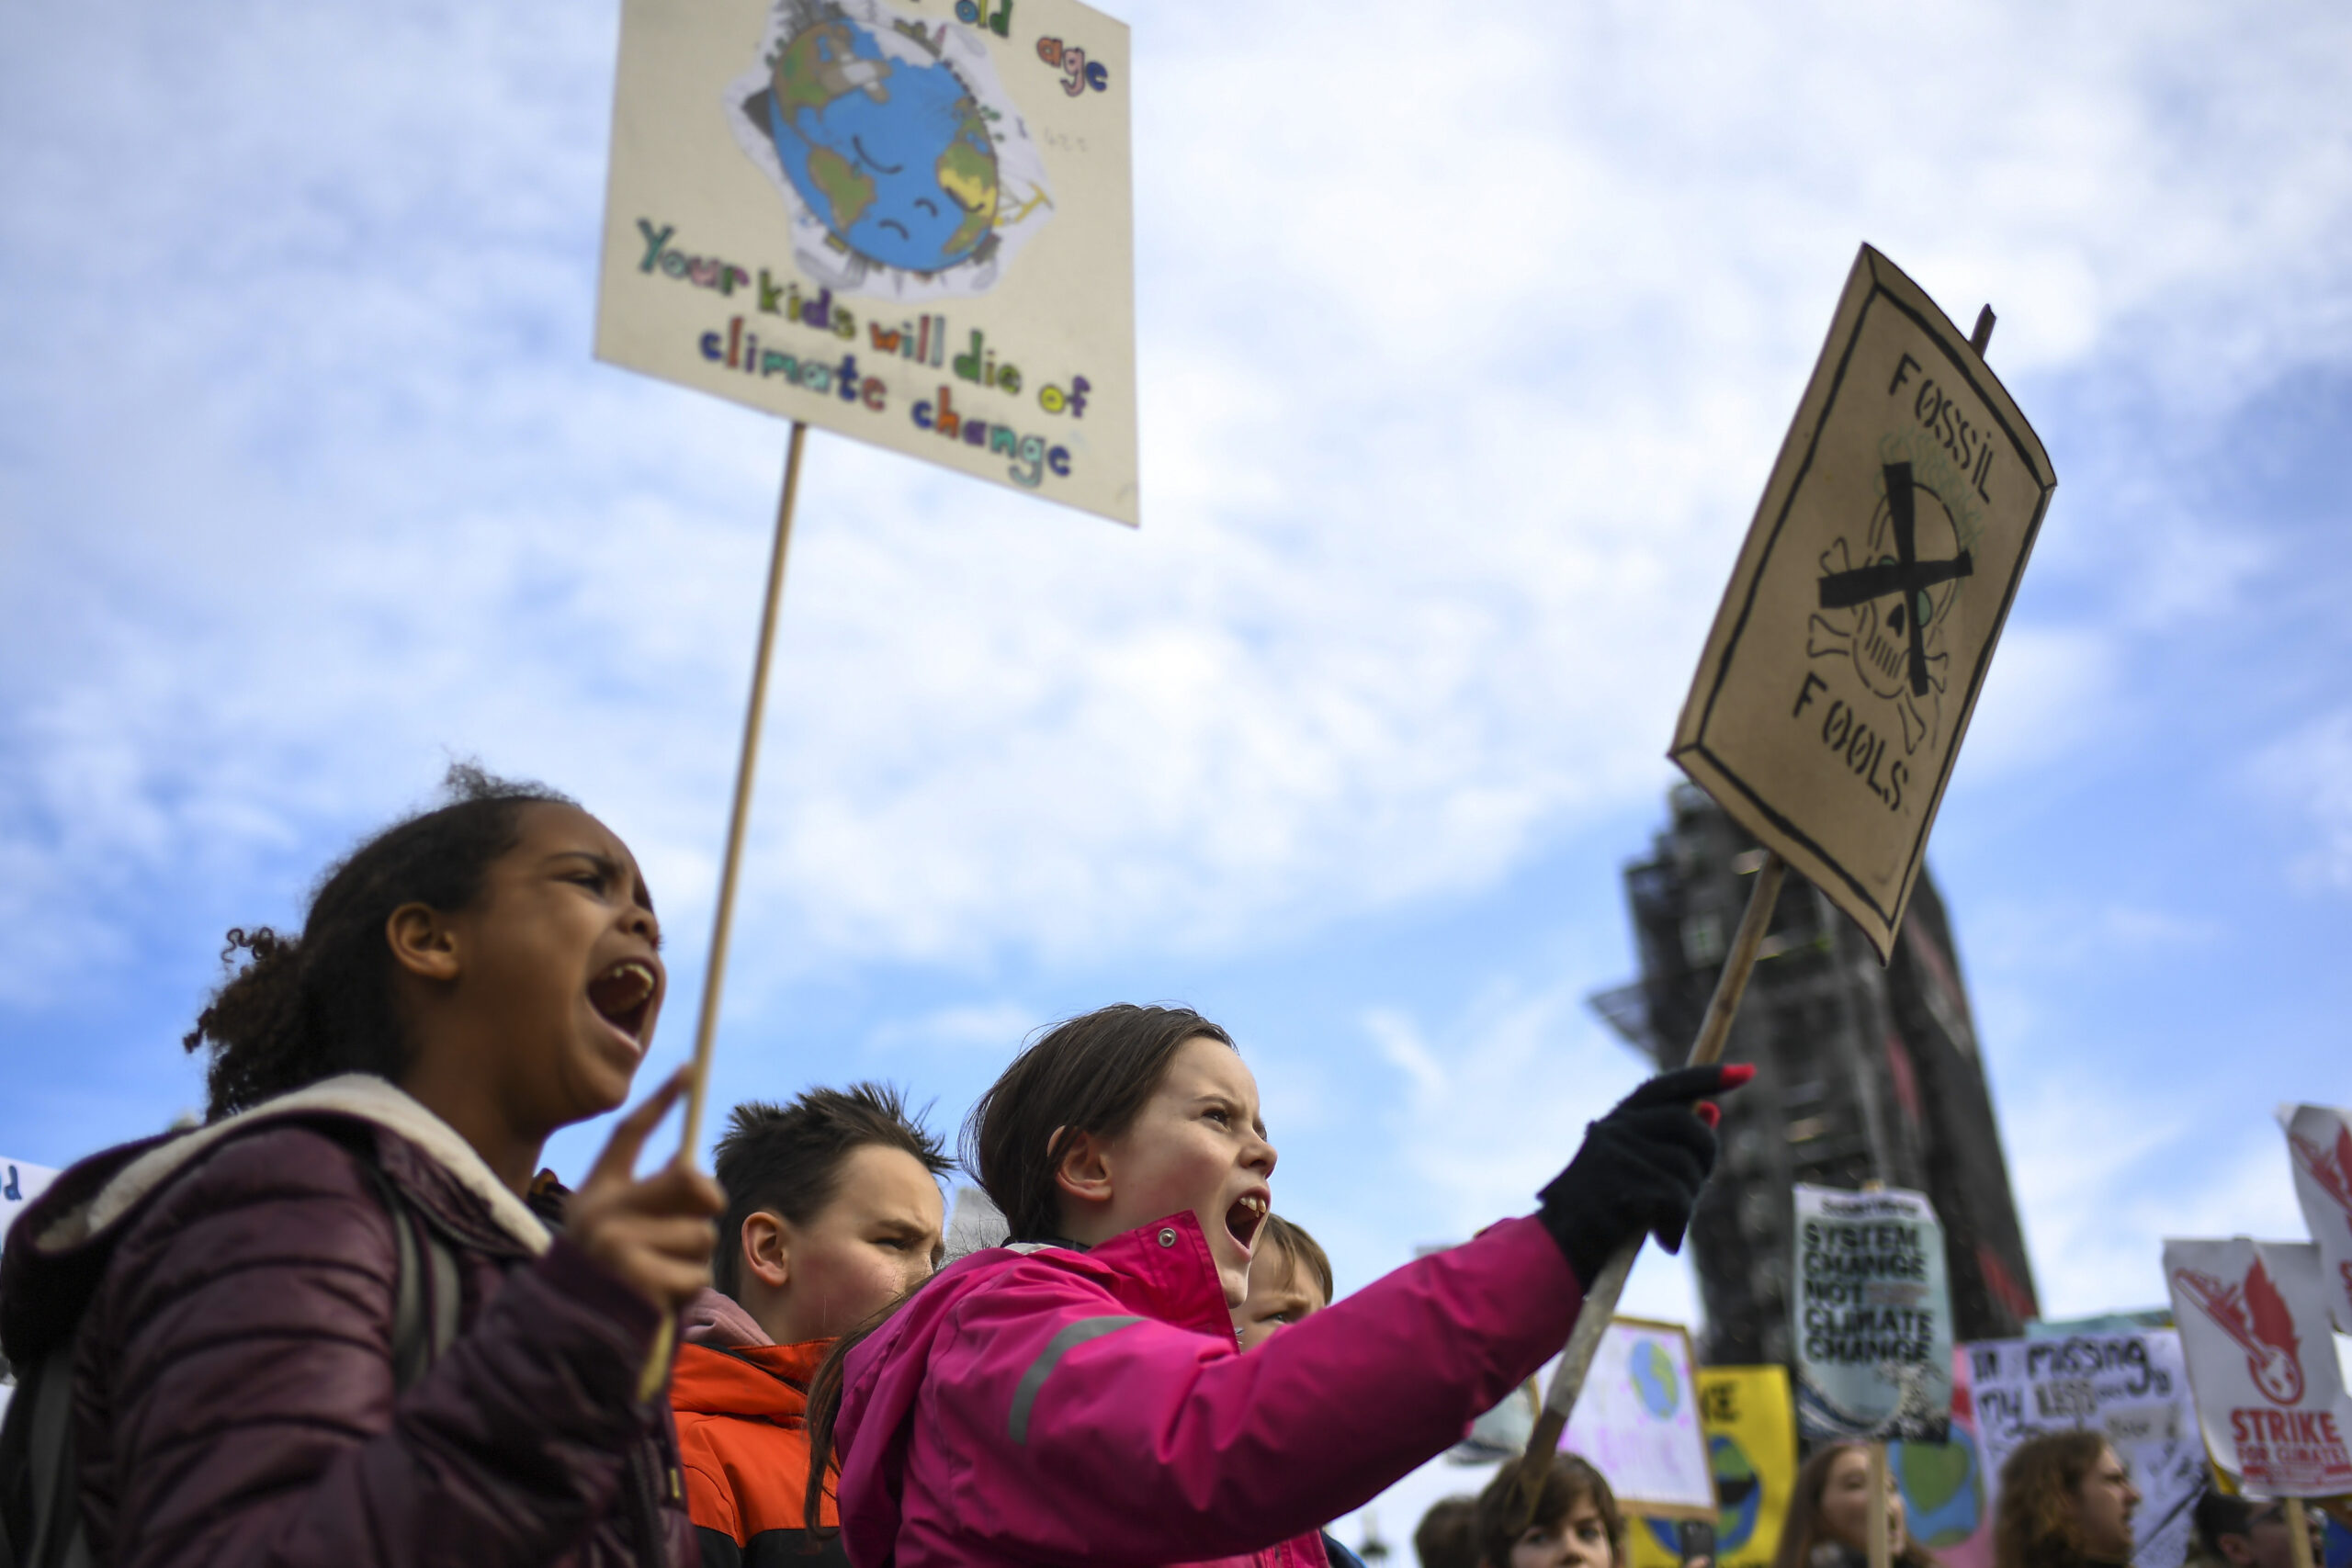 Children protesting government inaction on climate change